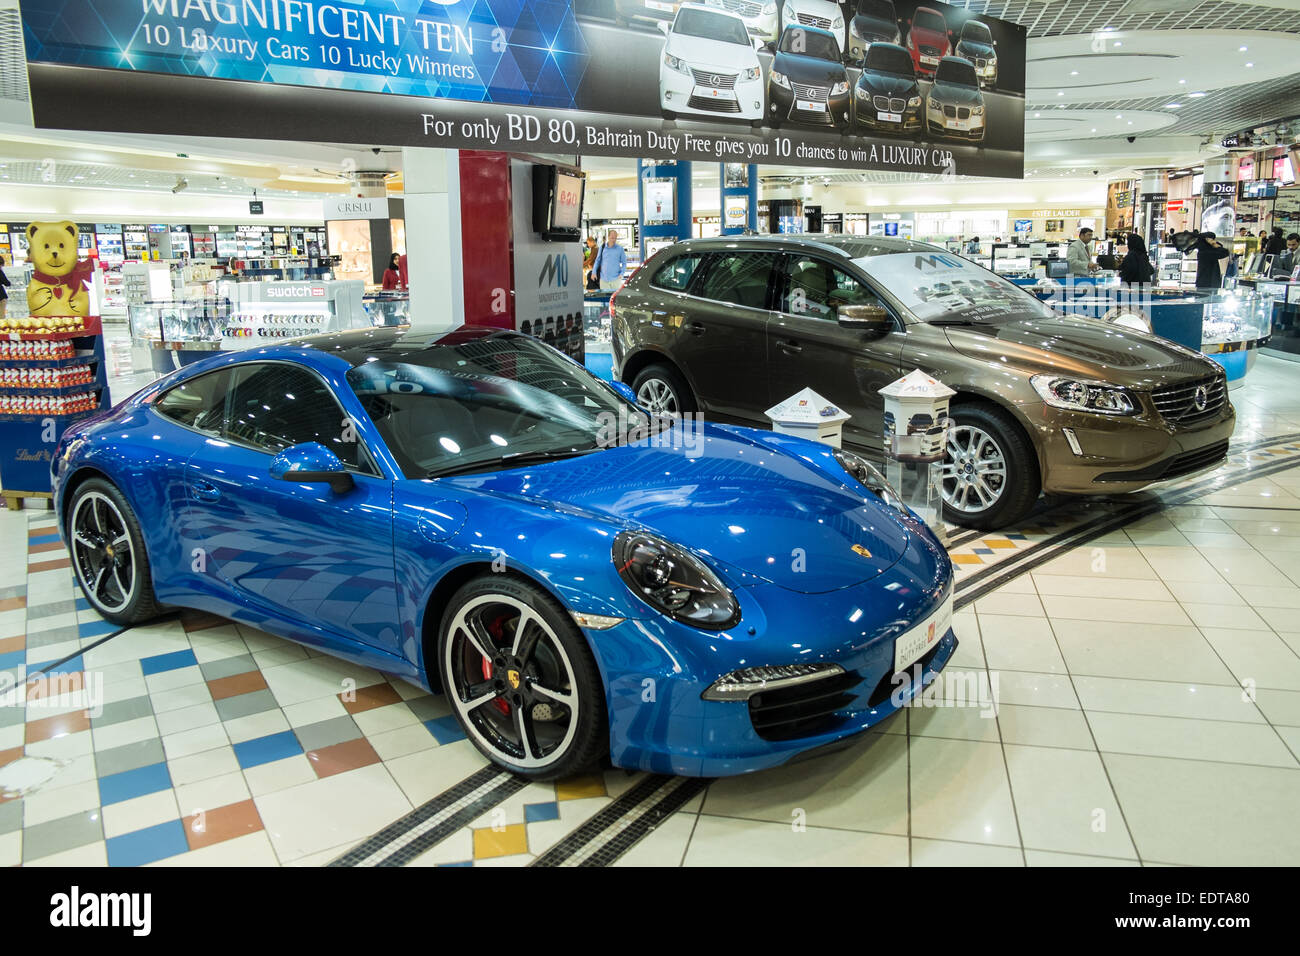 Lottery at Duty Free for blue Porsche and brown Volvo cars Bahrain International Airport, Bahrain, Middle East Stock Photo